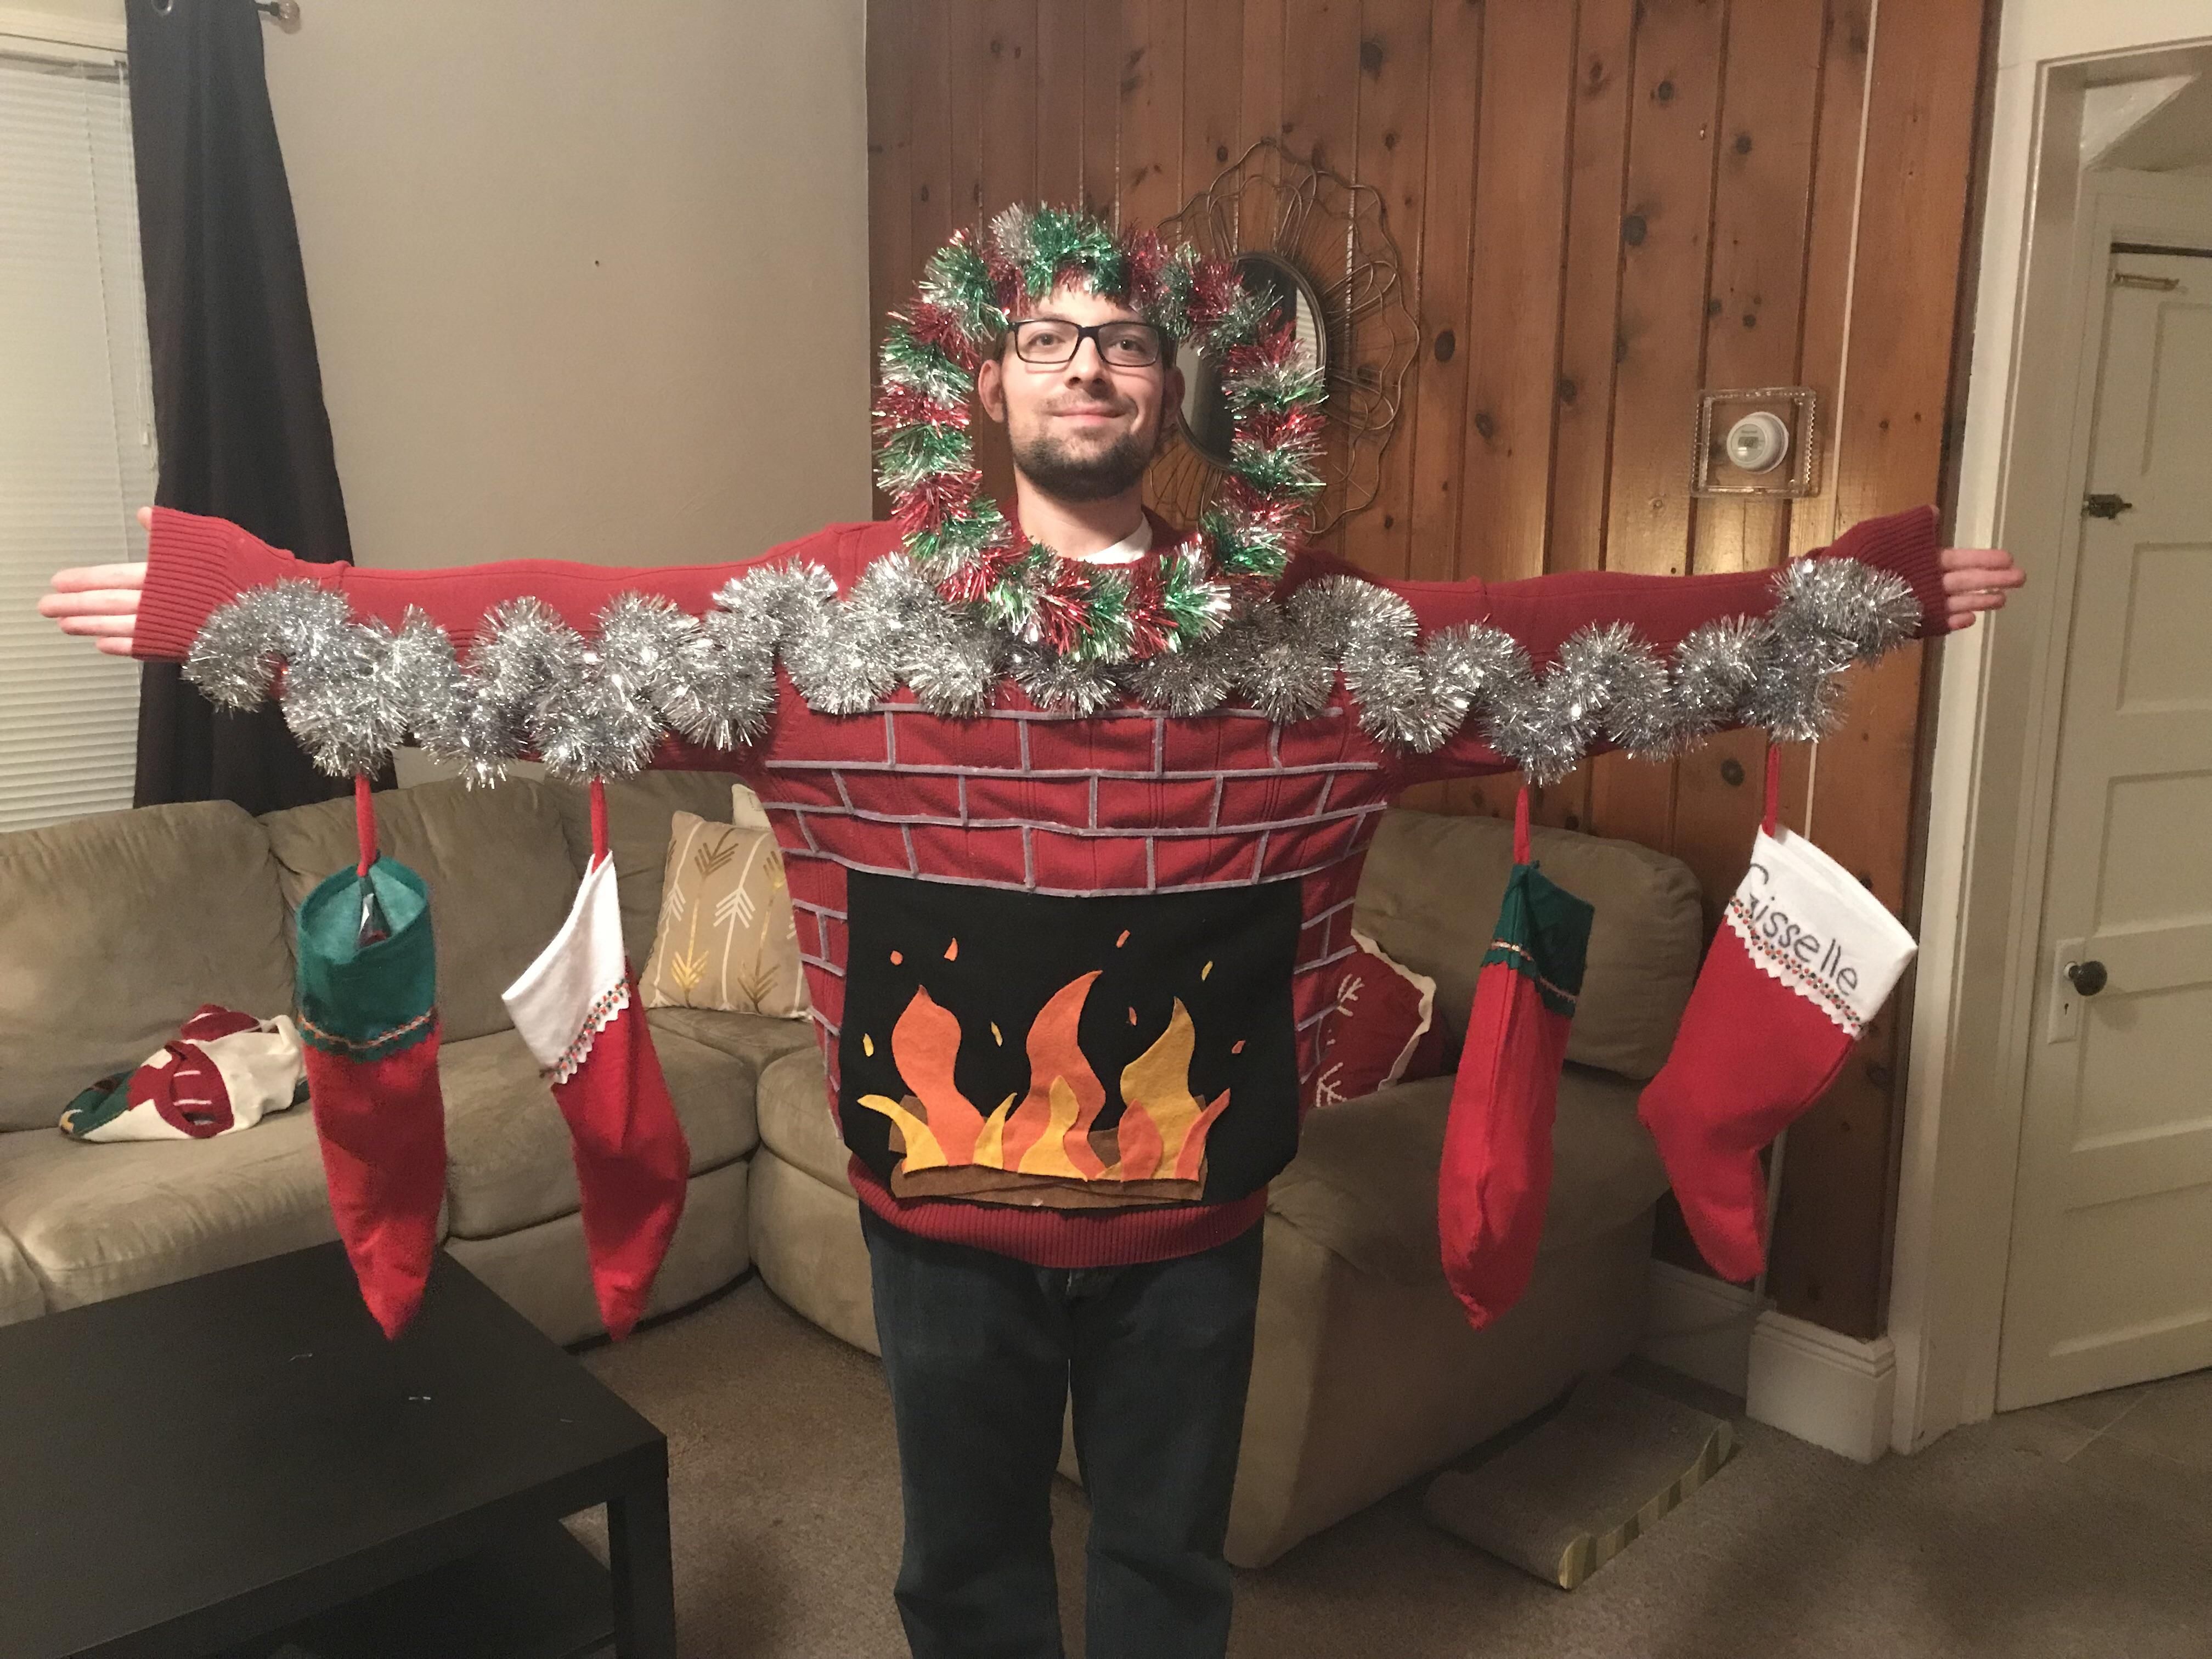 My friend just won 100$ for his workplace’s Ugly Sweater Contest.